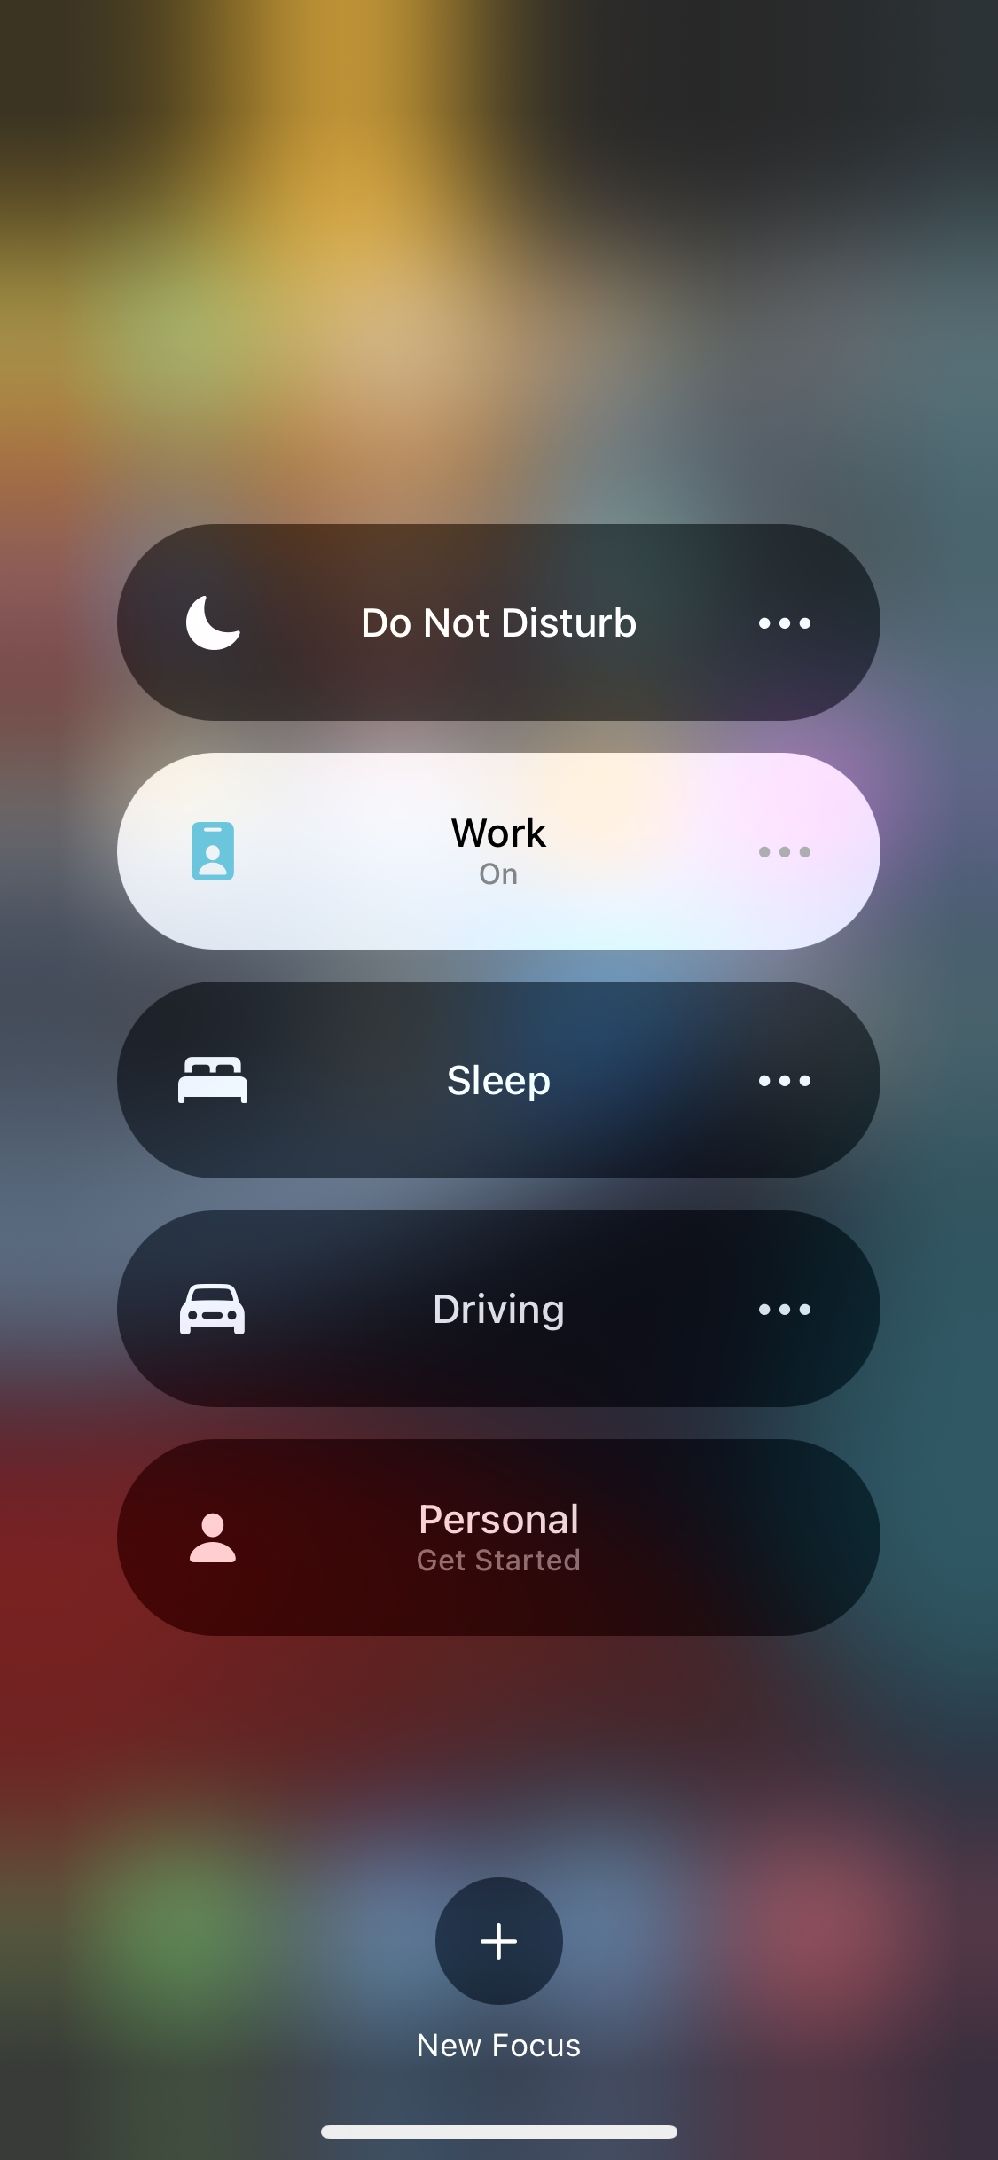 Focus modes in the Control Center